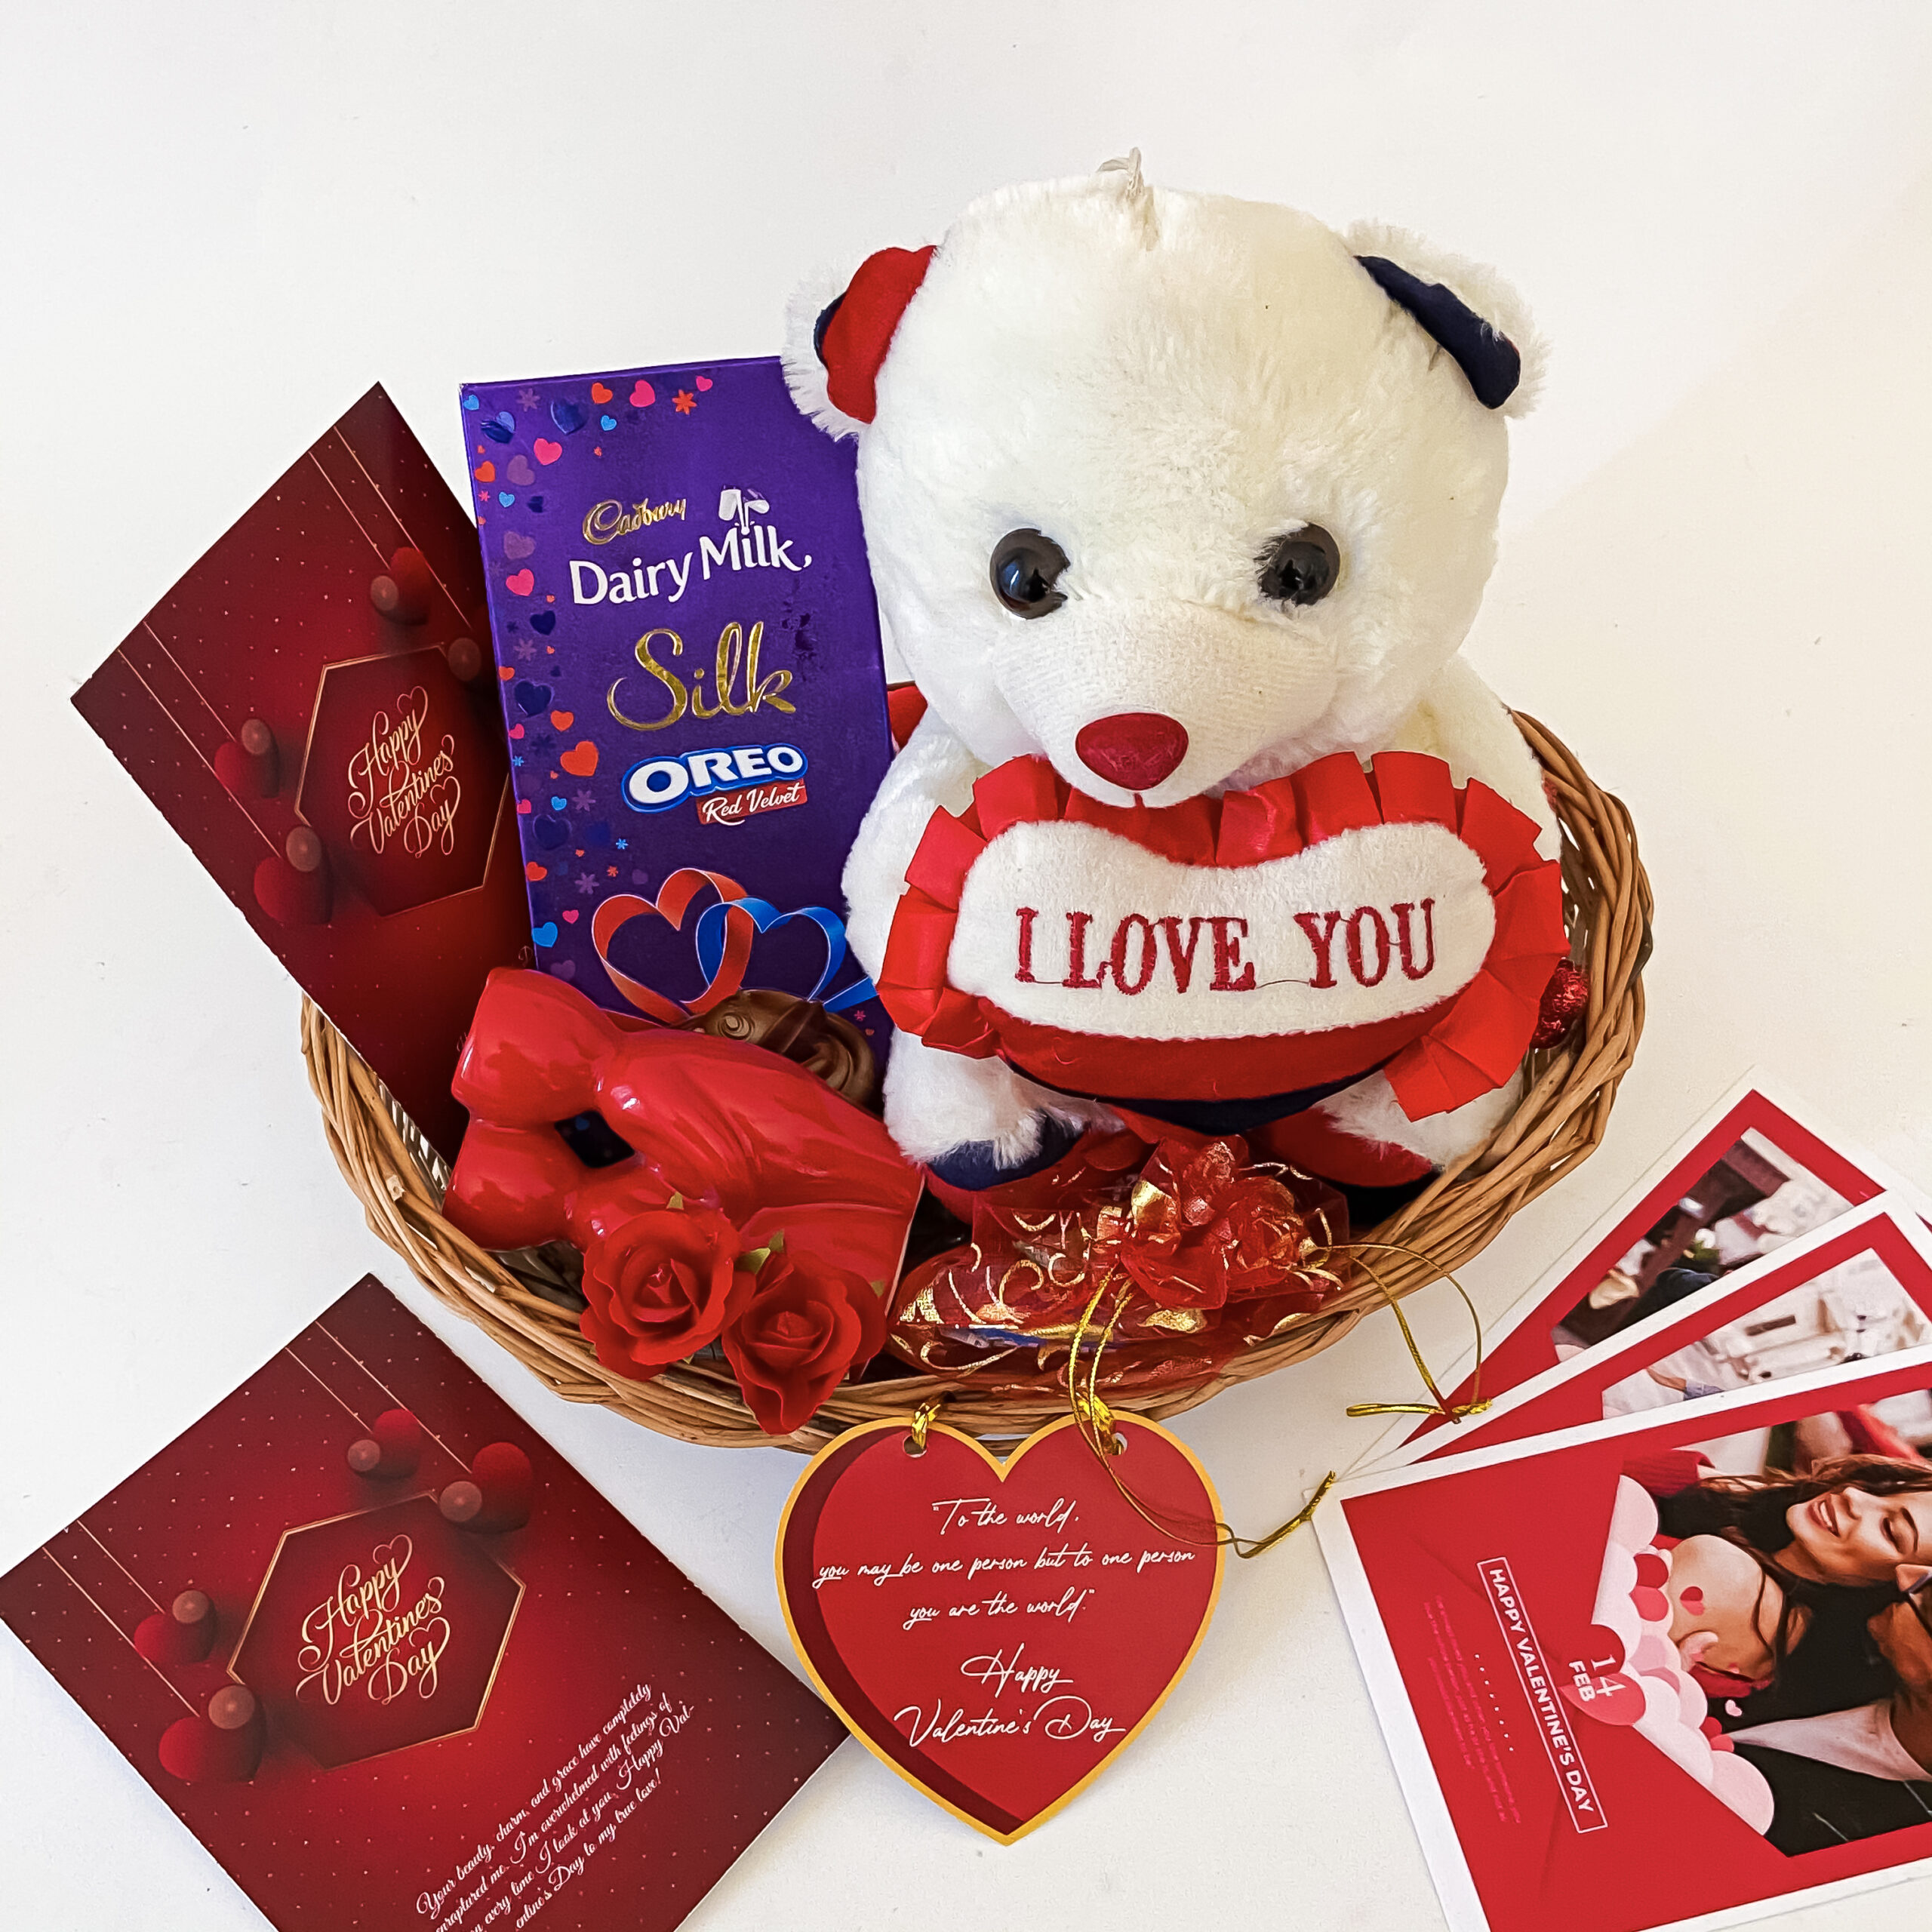 The best valentines day gifts you can buy online | Business Insider India